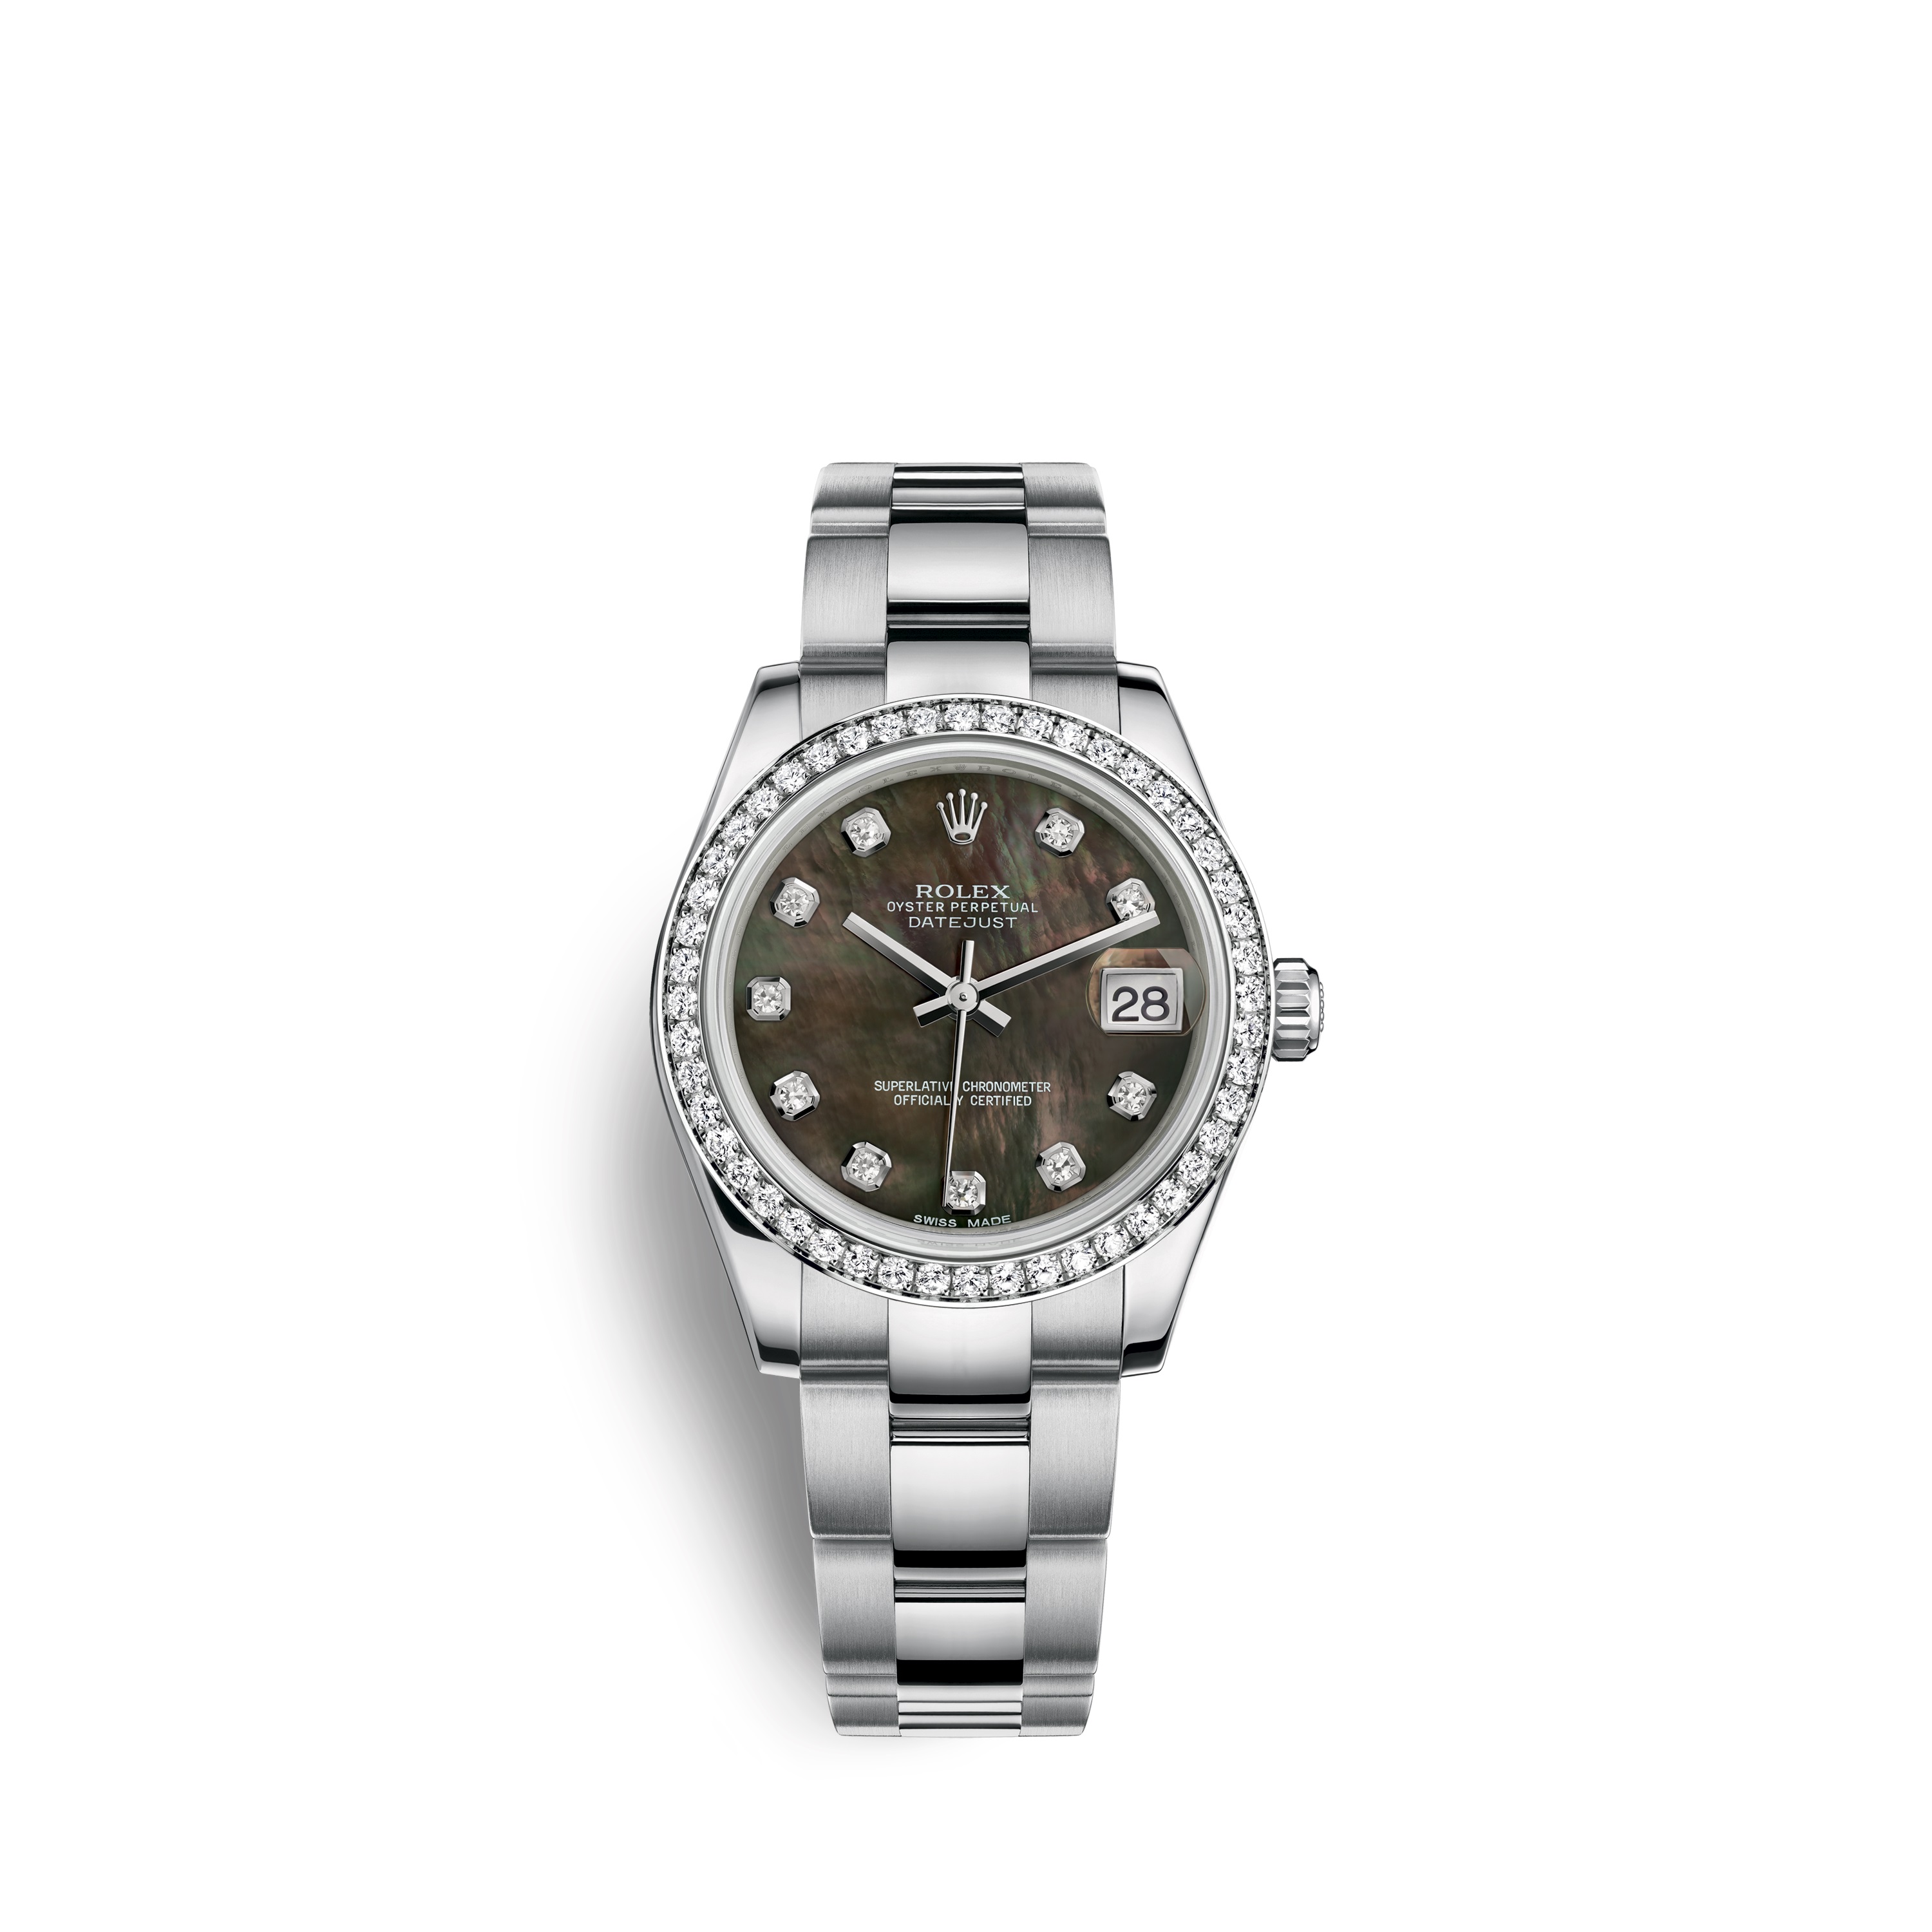 Datejust 31 178384 White Gold & Diamonds Watch (Black Mother-of-Pearl Set with Diamonds)